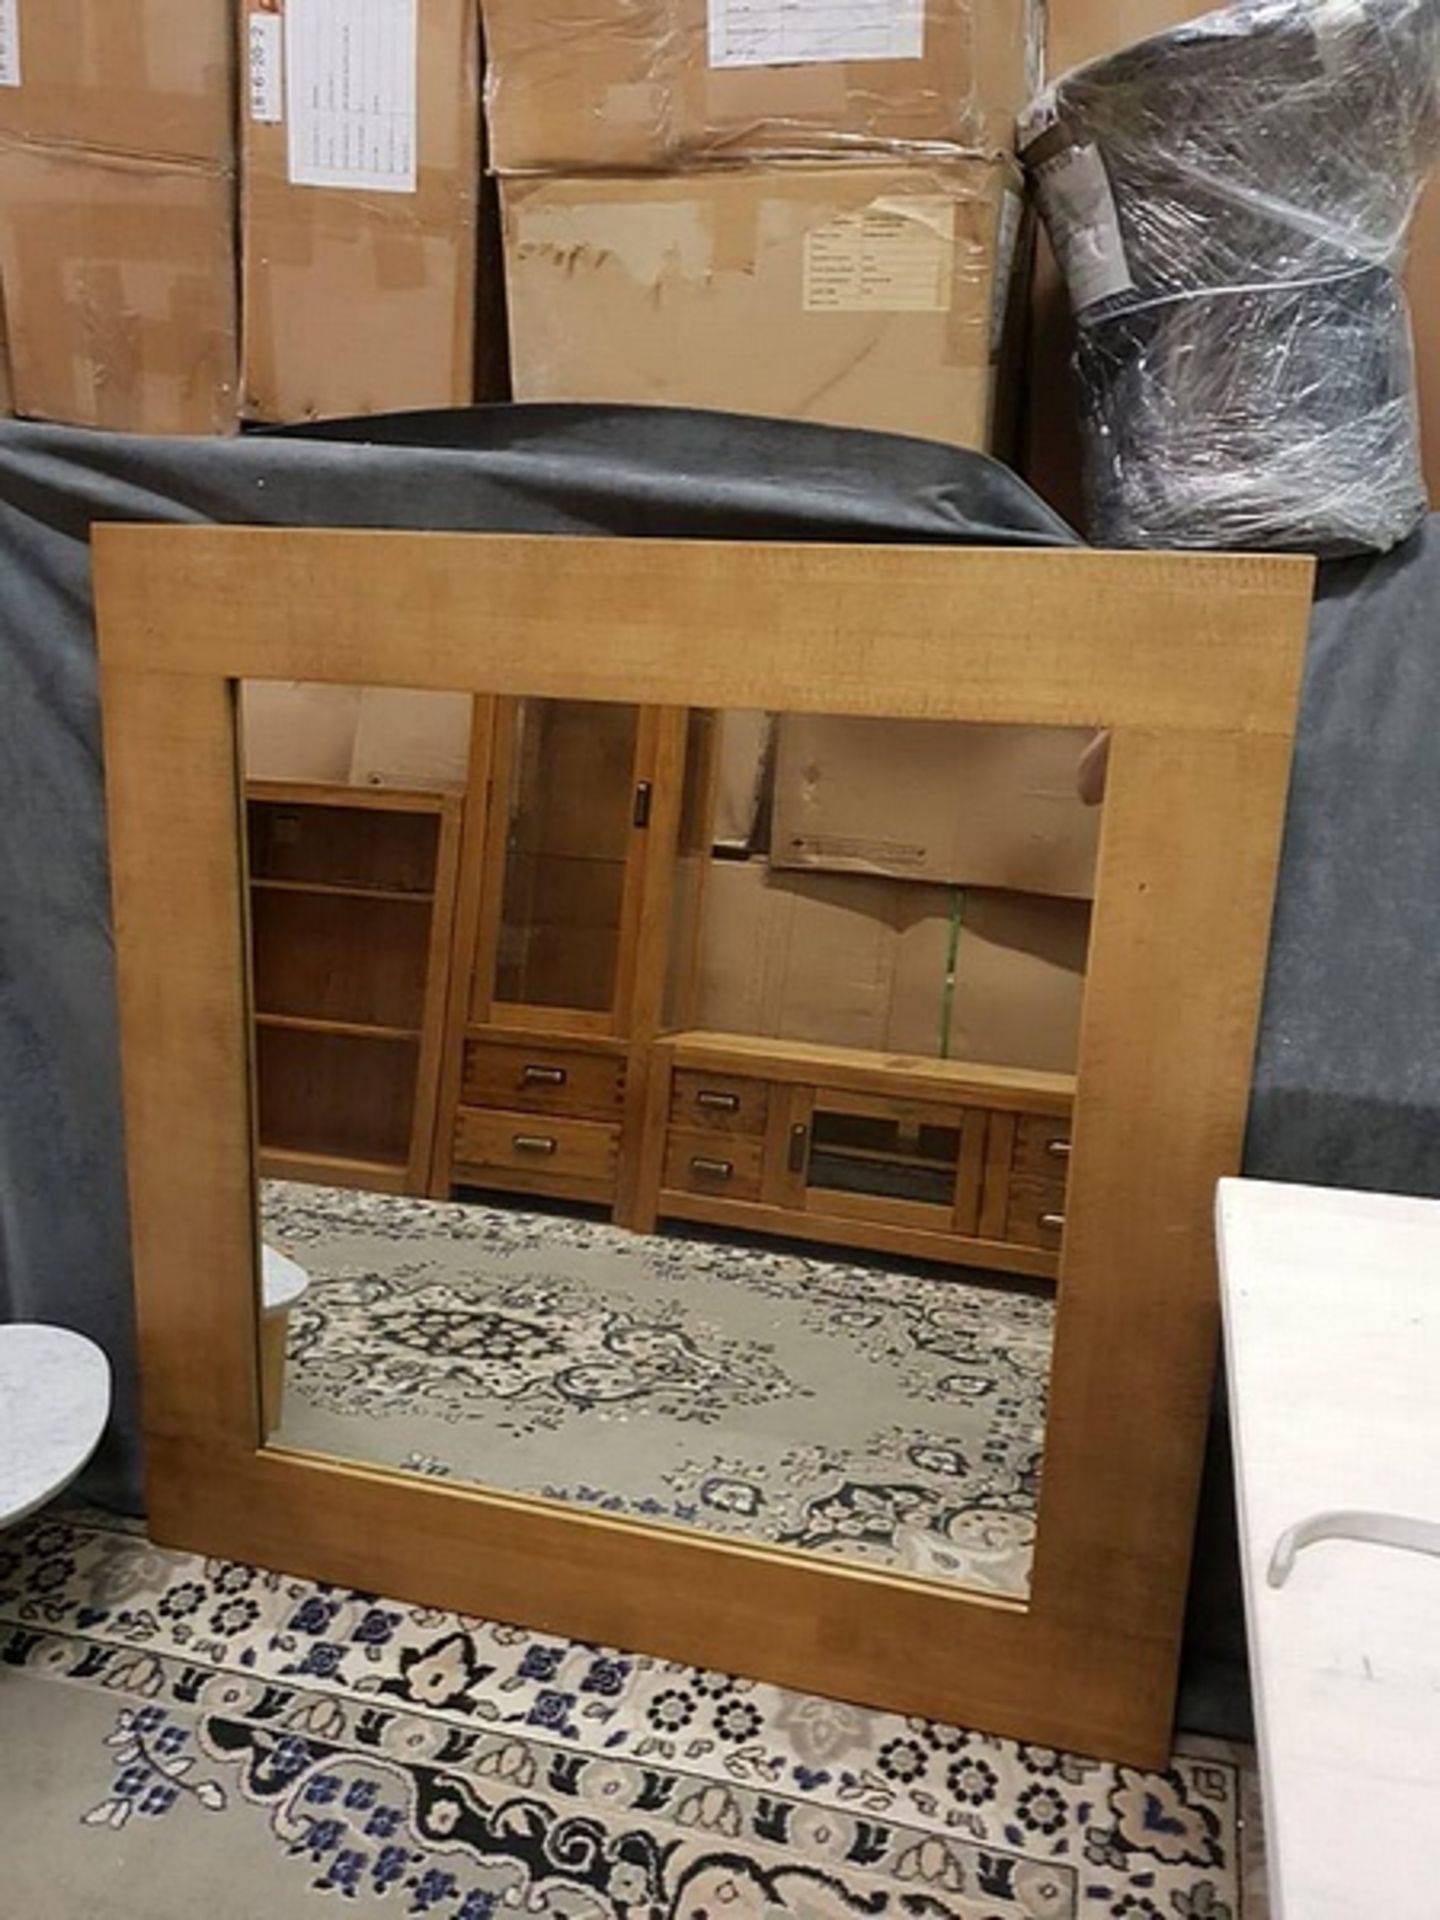 Marbello Rustic Wood Square Mirror To Inspire A Natural Look, This Mirrors Rustic Frame Is Crafted